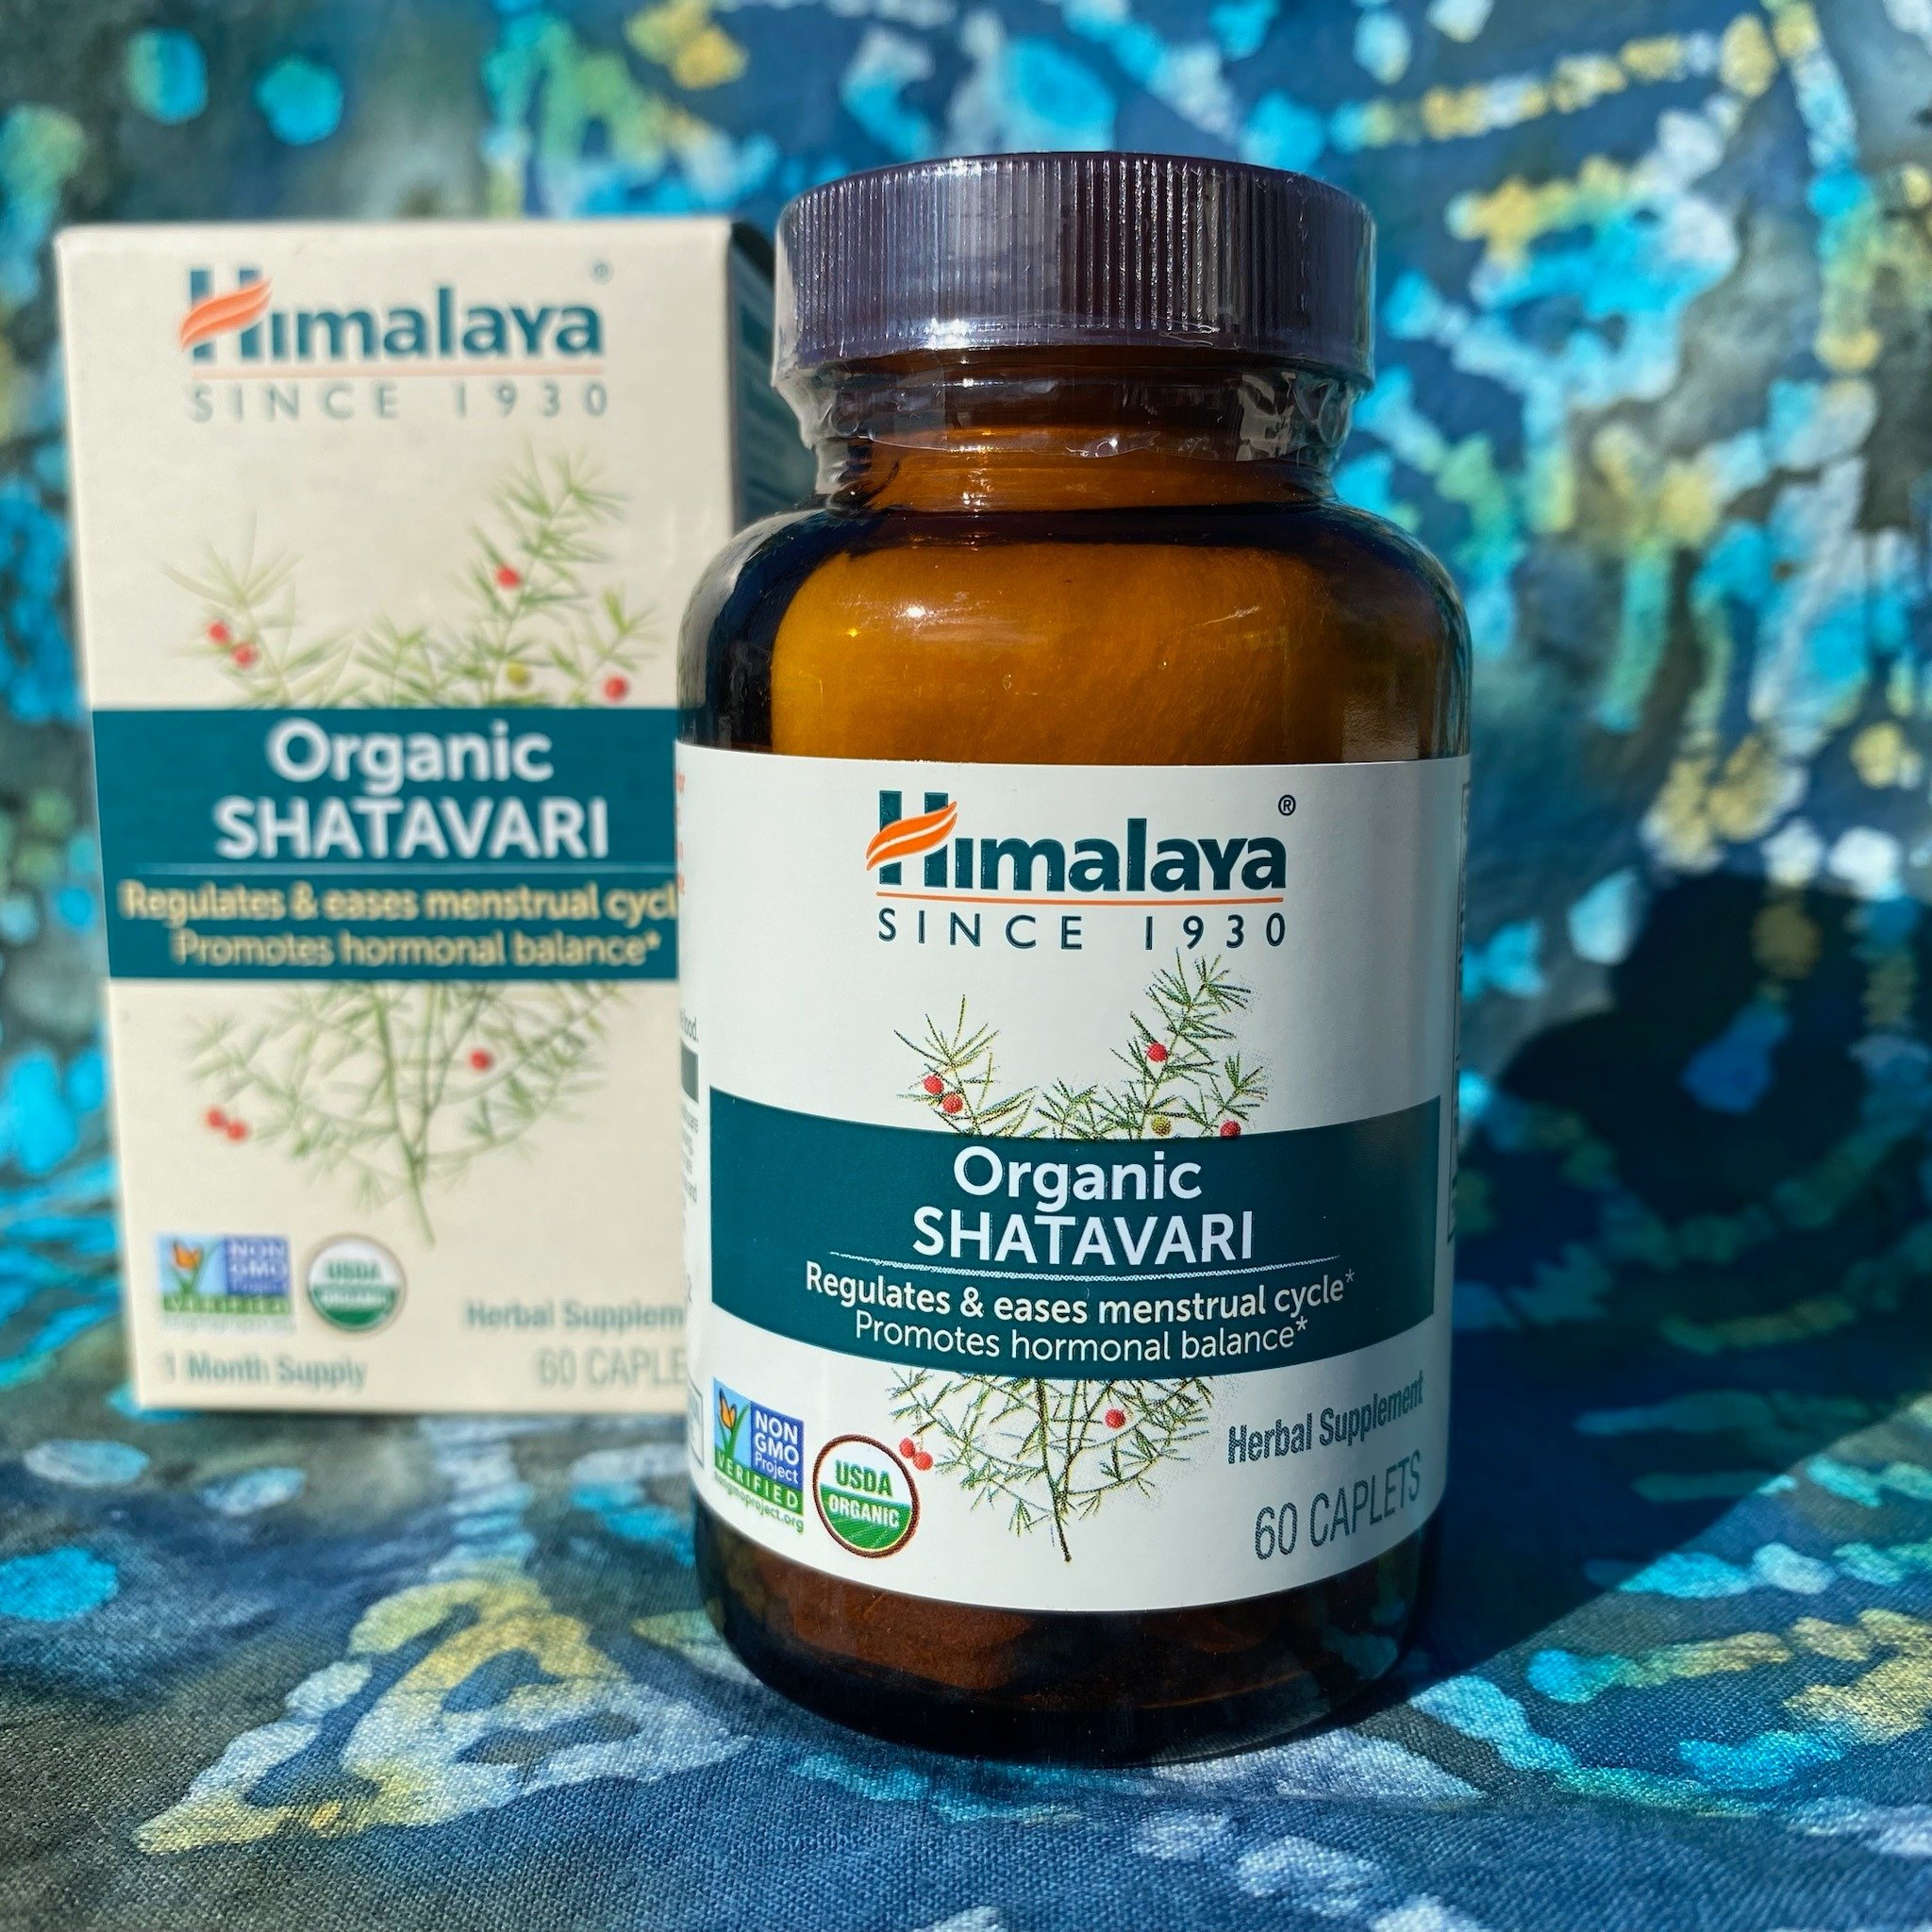 Shatavari, &ldquo;Queen of Herbs&rdquo;, is well known by some as a rasayana (rejuvenator) for estrogen dominant bodies, but did you know it&rsquo;s an adaptogen suitable for all sexes? Many people find adaptogens such as rhodiola, ginseng, and ashwa